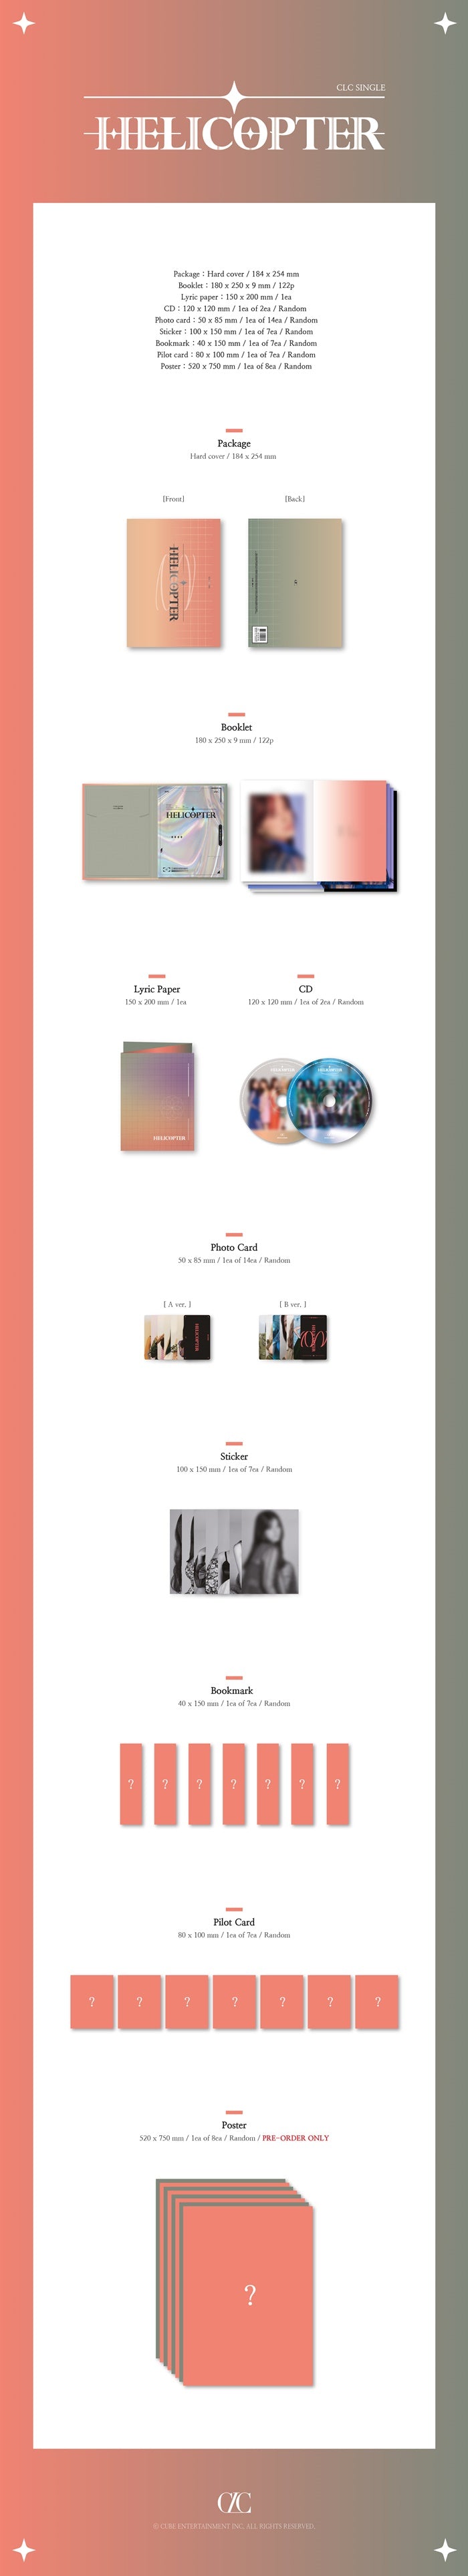 1 CD
1 Booklet (122 pages)
1 Lyric Paper
1 Photo Card
1 Sticker
1 Bookmark
1 Pilot Card